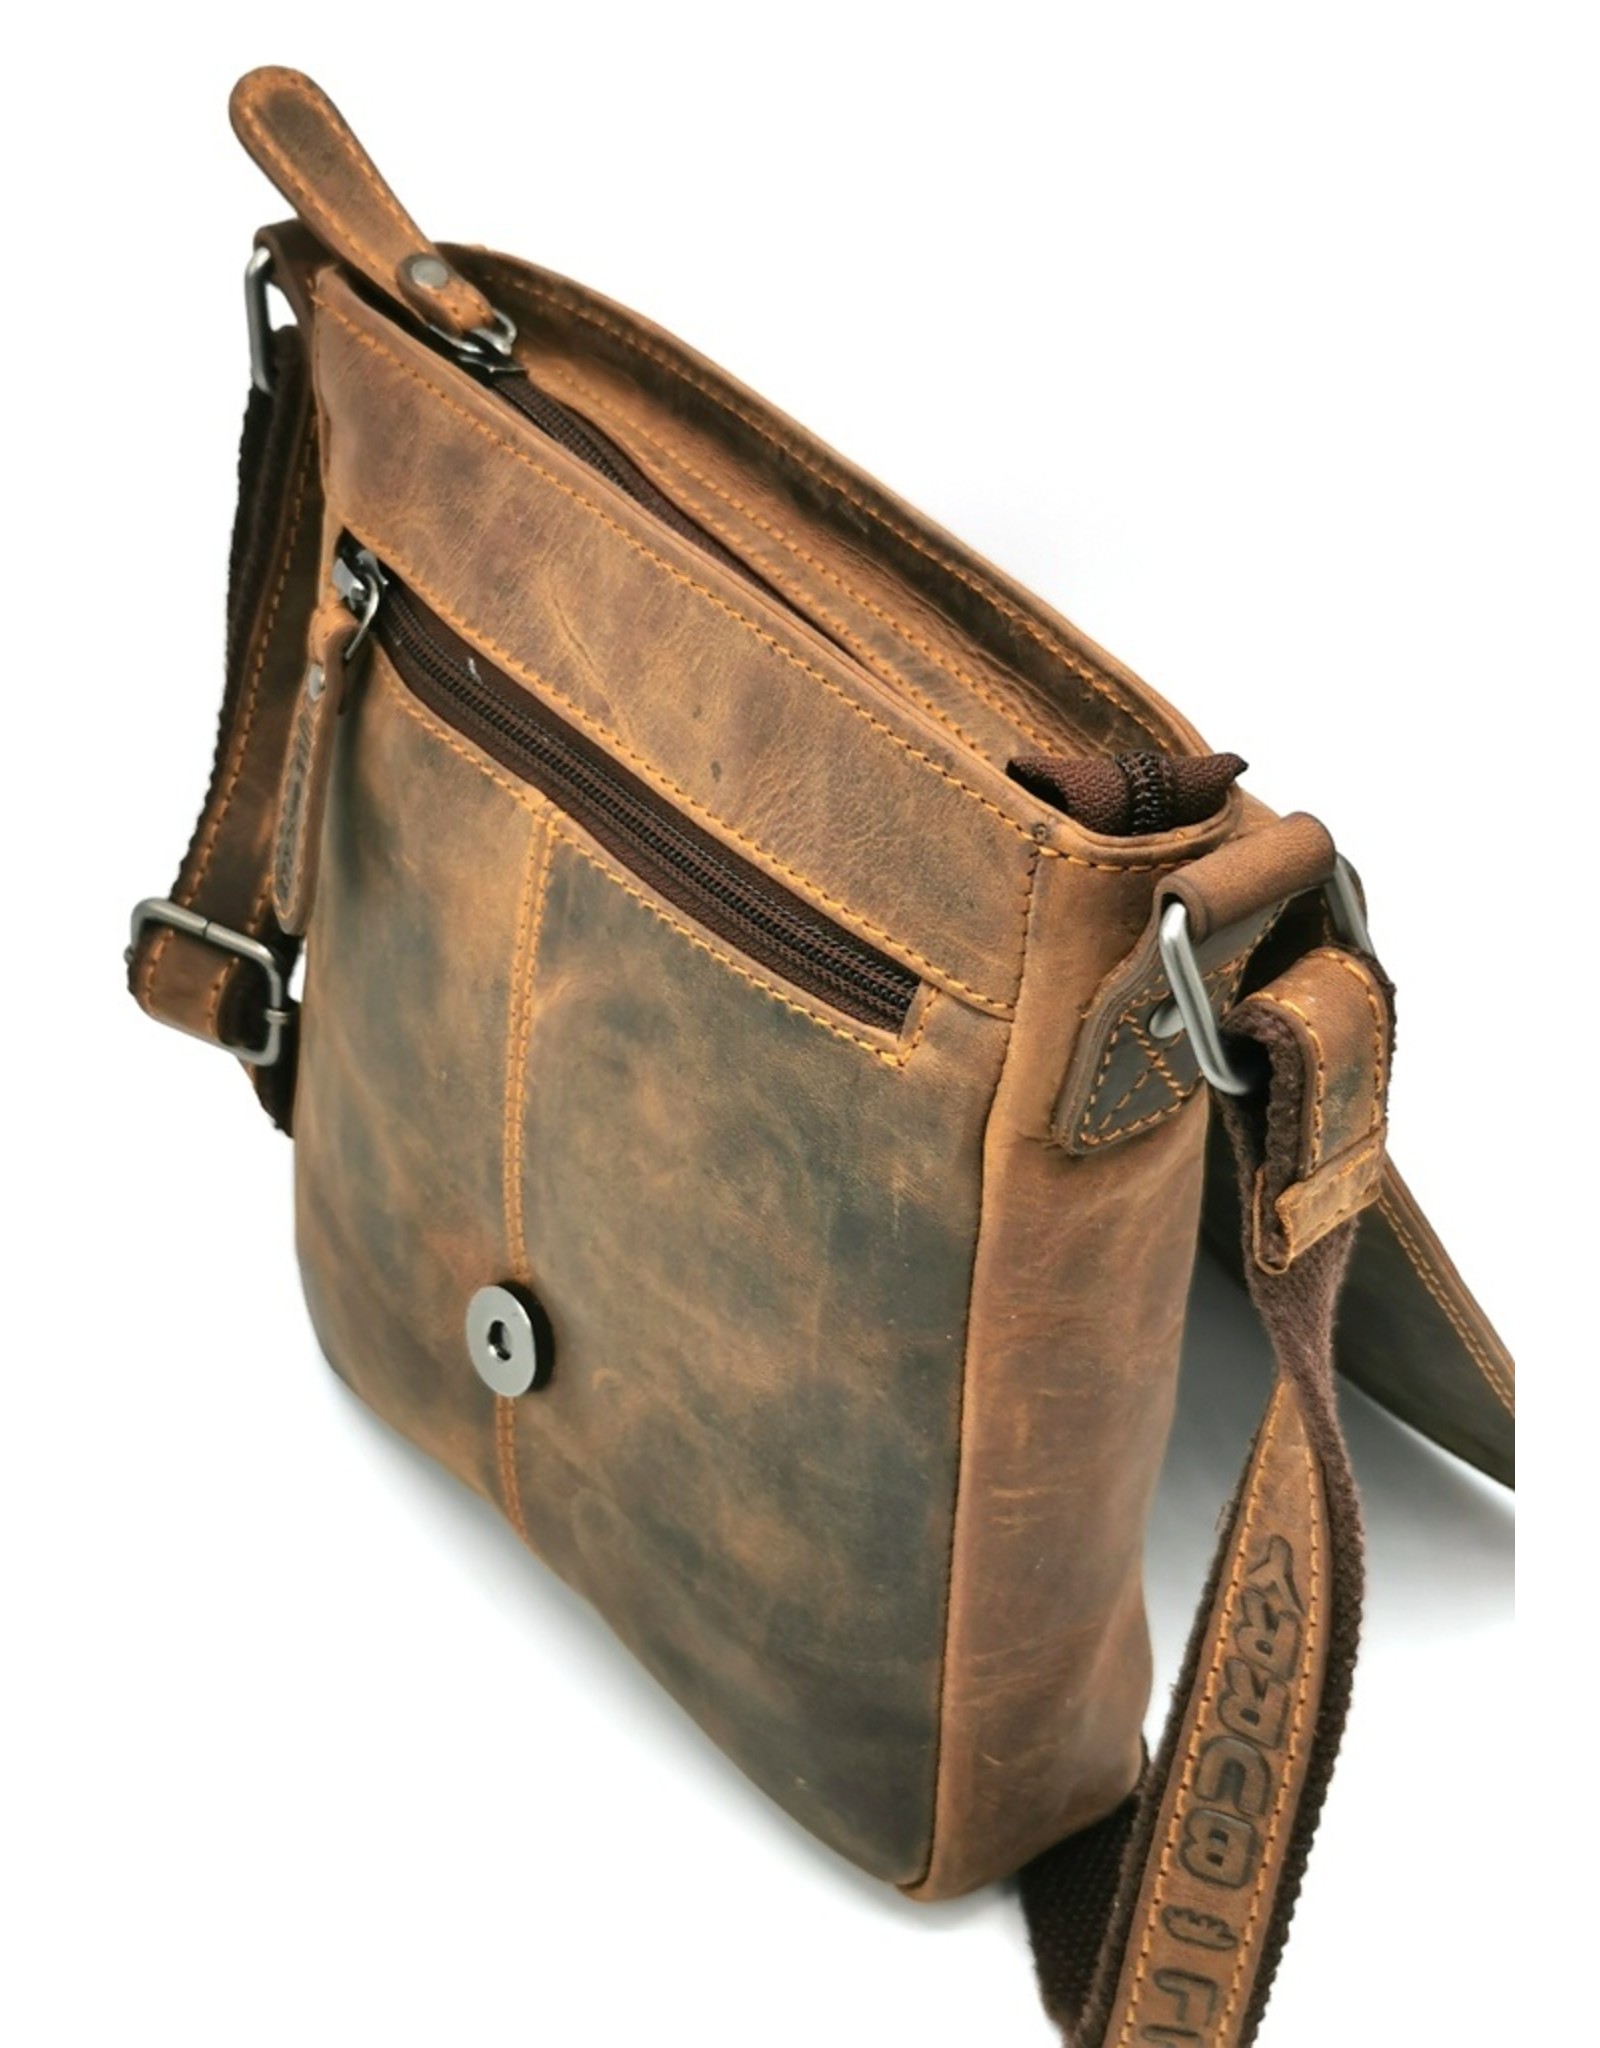 HillBurry Leather bags - Hillburry Leather Bag with Cover